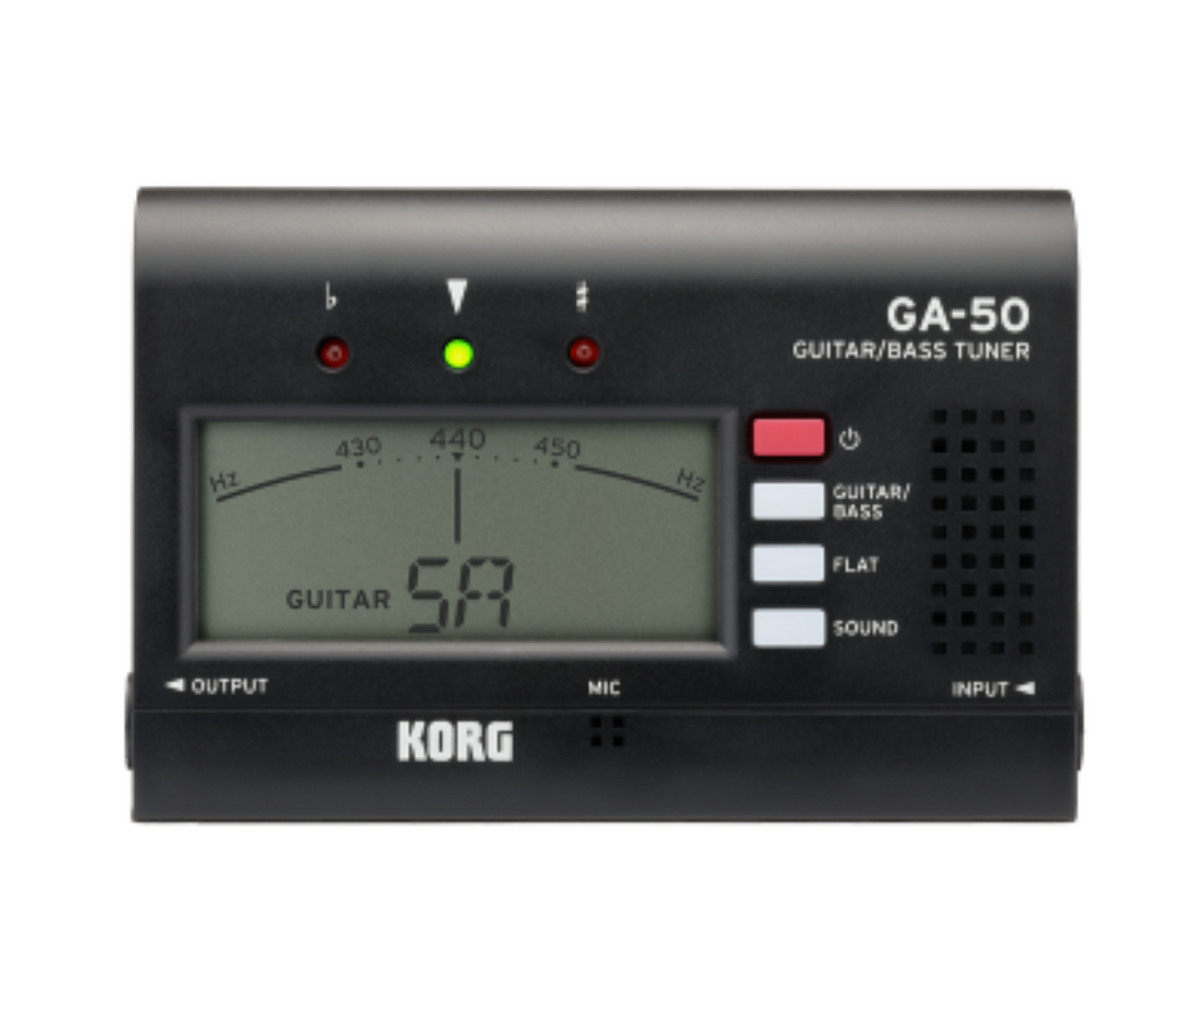 KORG GA-50 Best Guitar/Bass Tuner Supports 7-string Guitars and 5 or 6-string Basses with Memory Backup Function and Auto Power-off Function